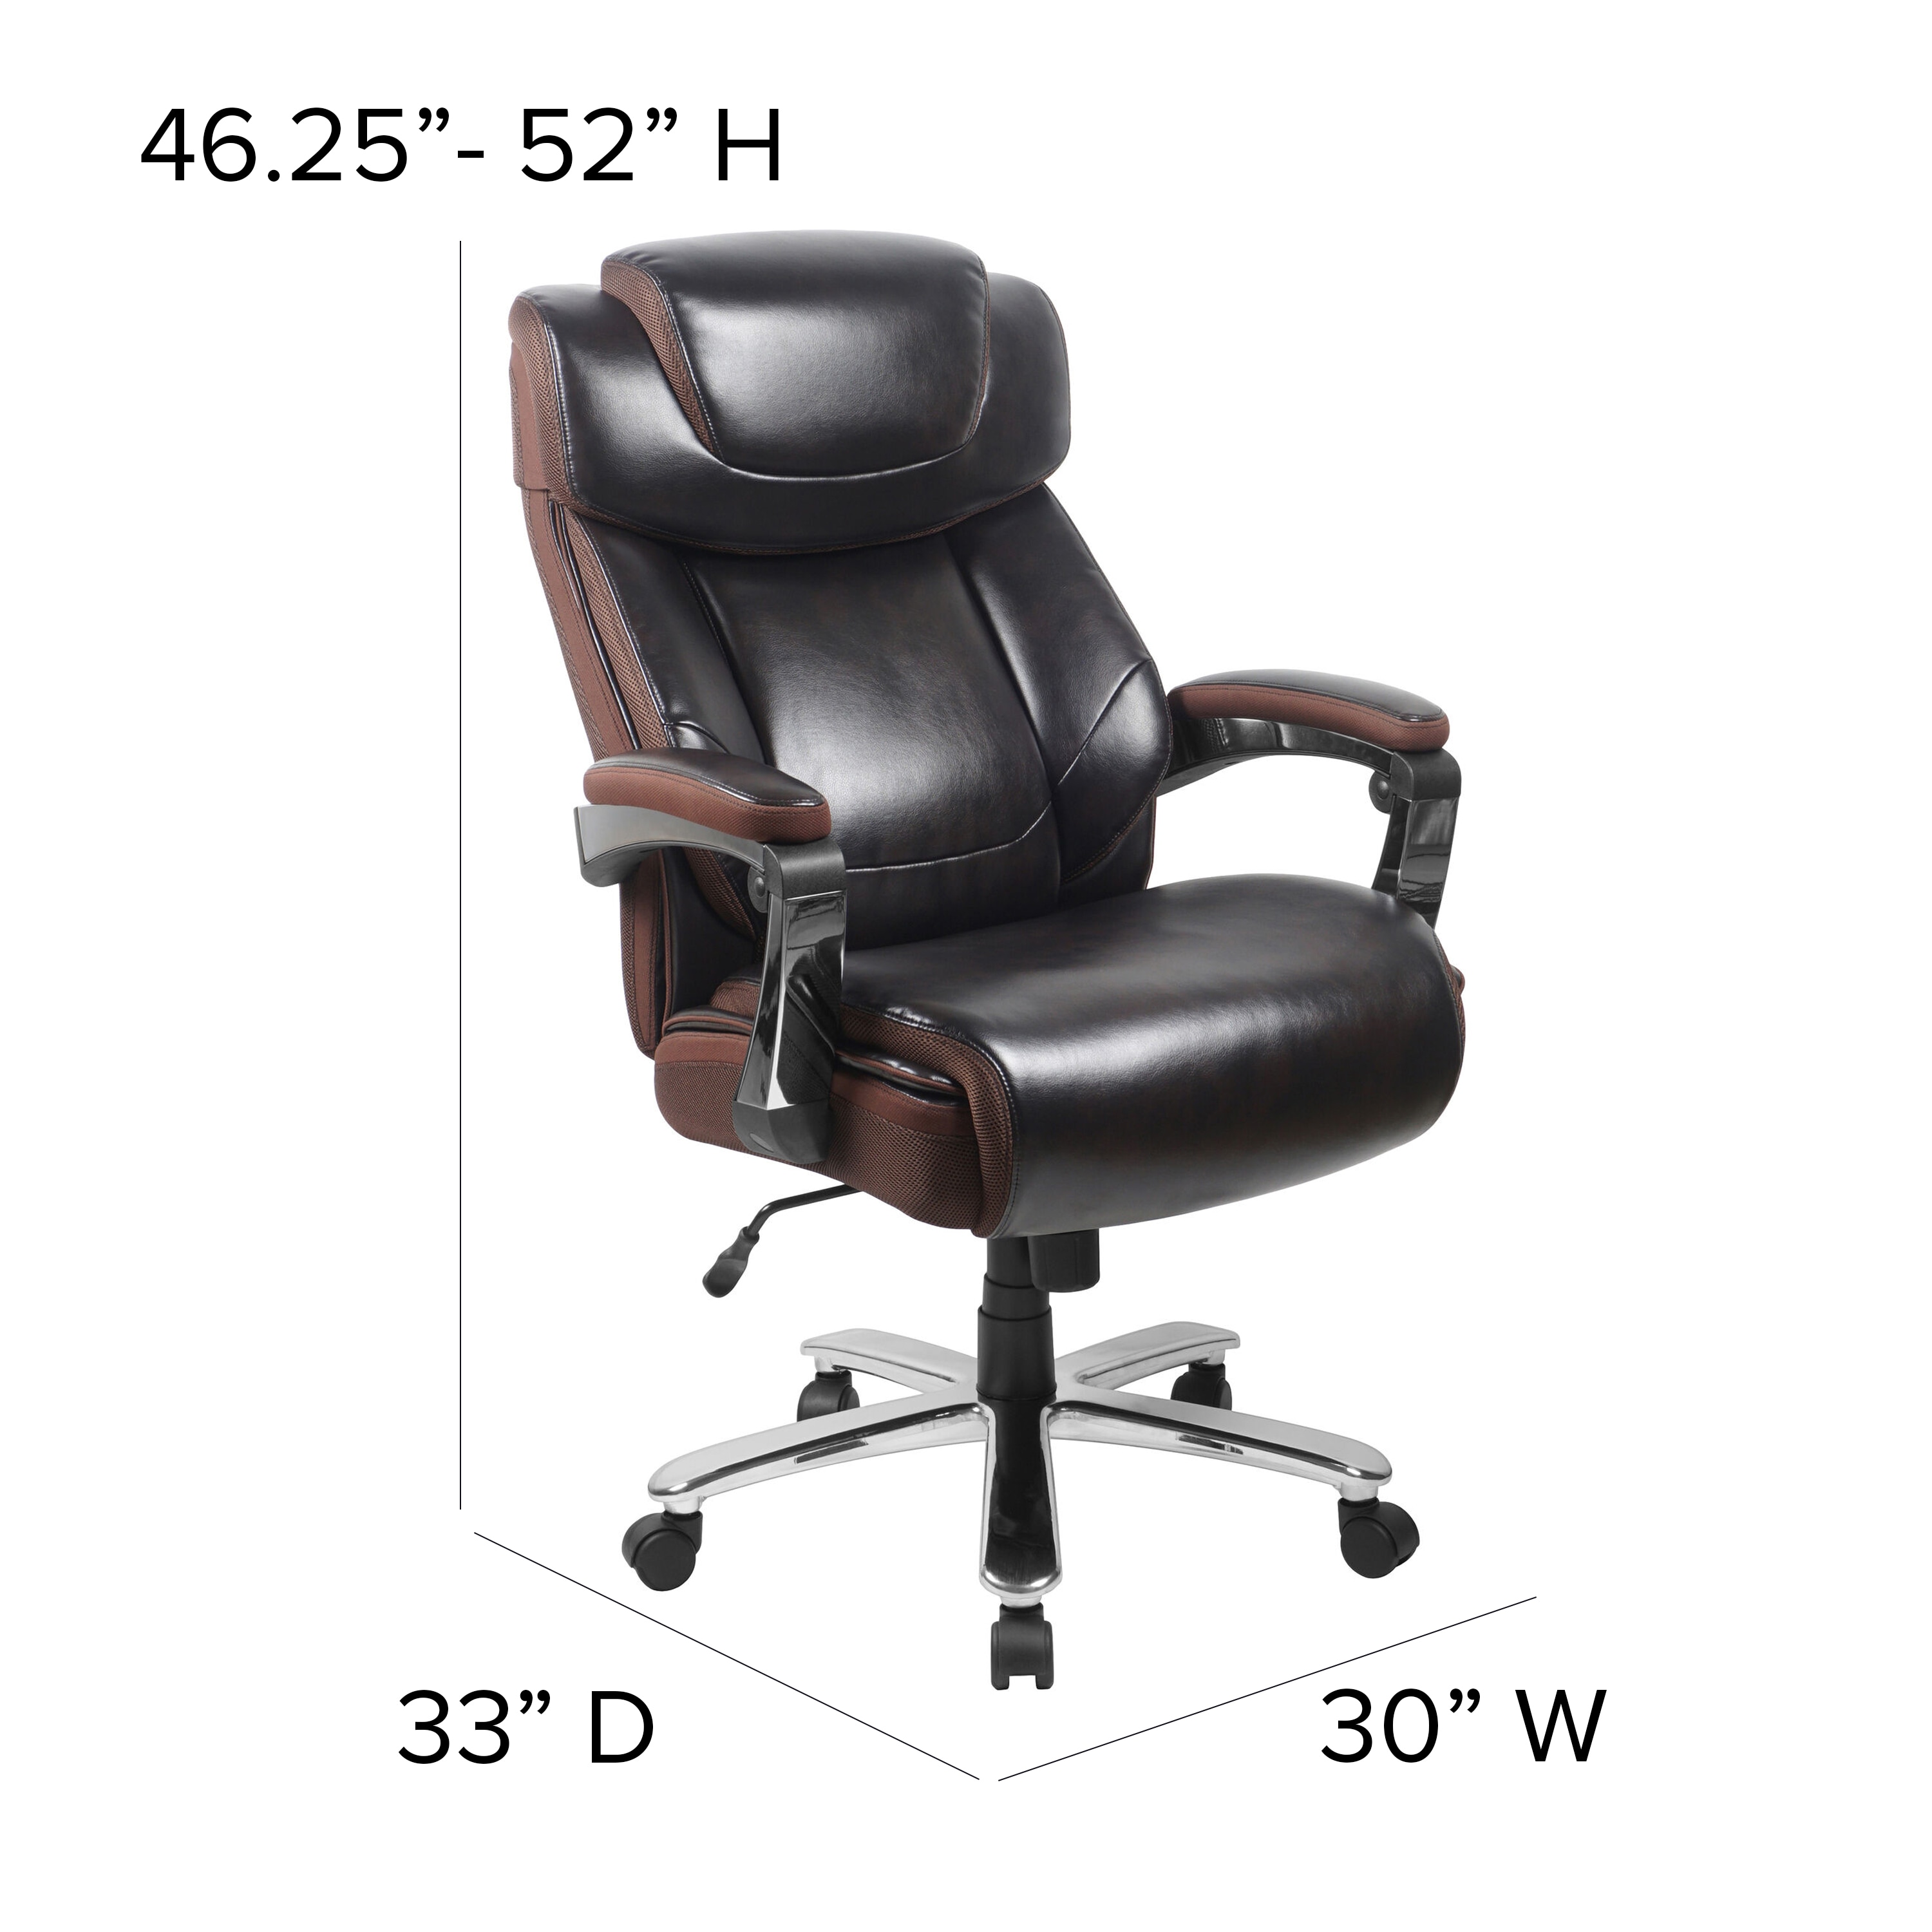 One-piece Lumbar Cushion,Waist Support Cushion Sitting, Integrated Molding,  Ideal For Office Chairs And Home Work